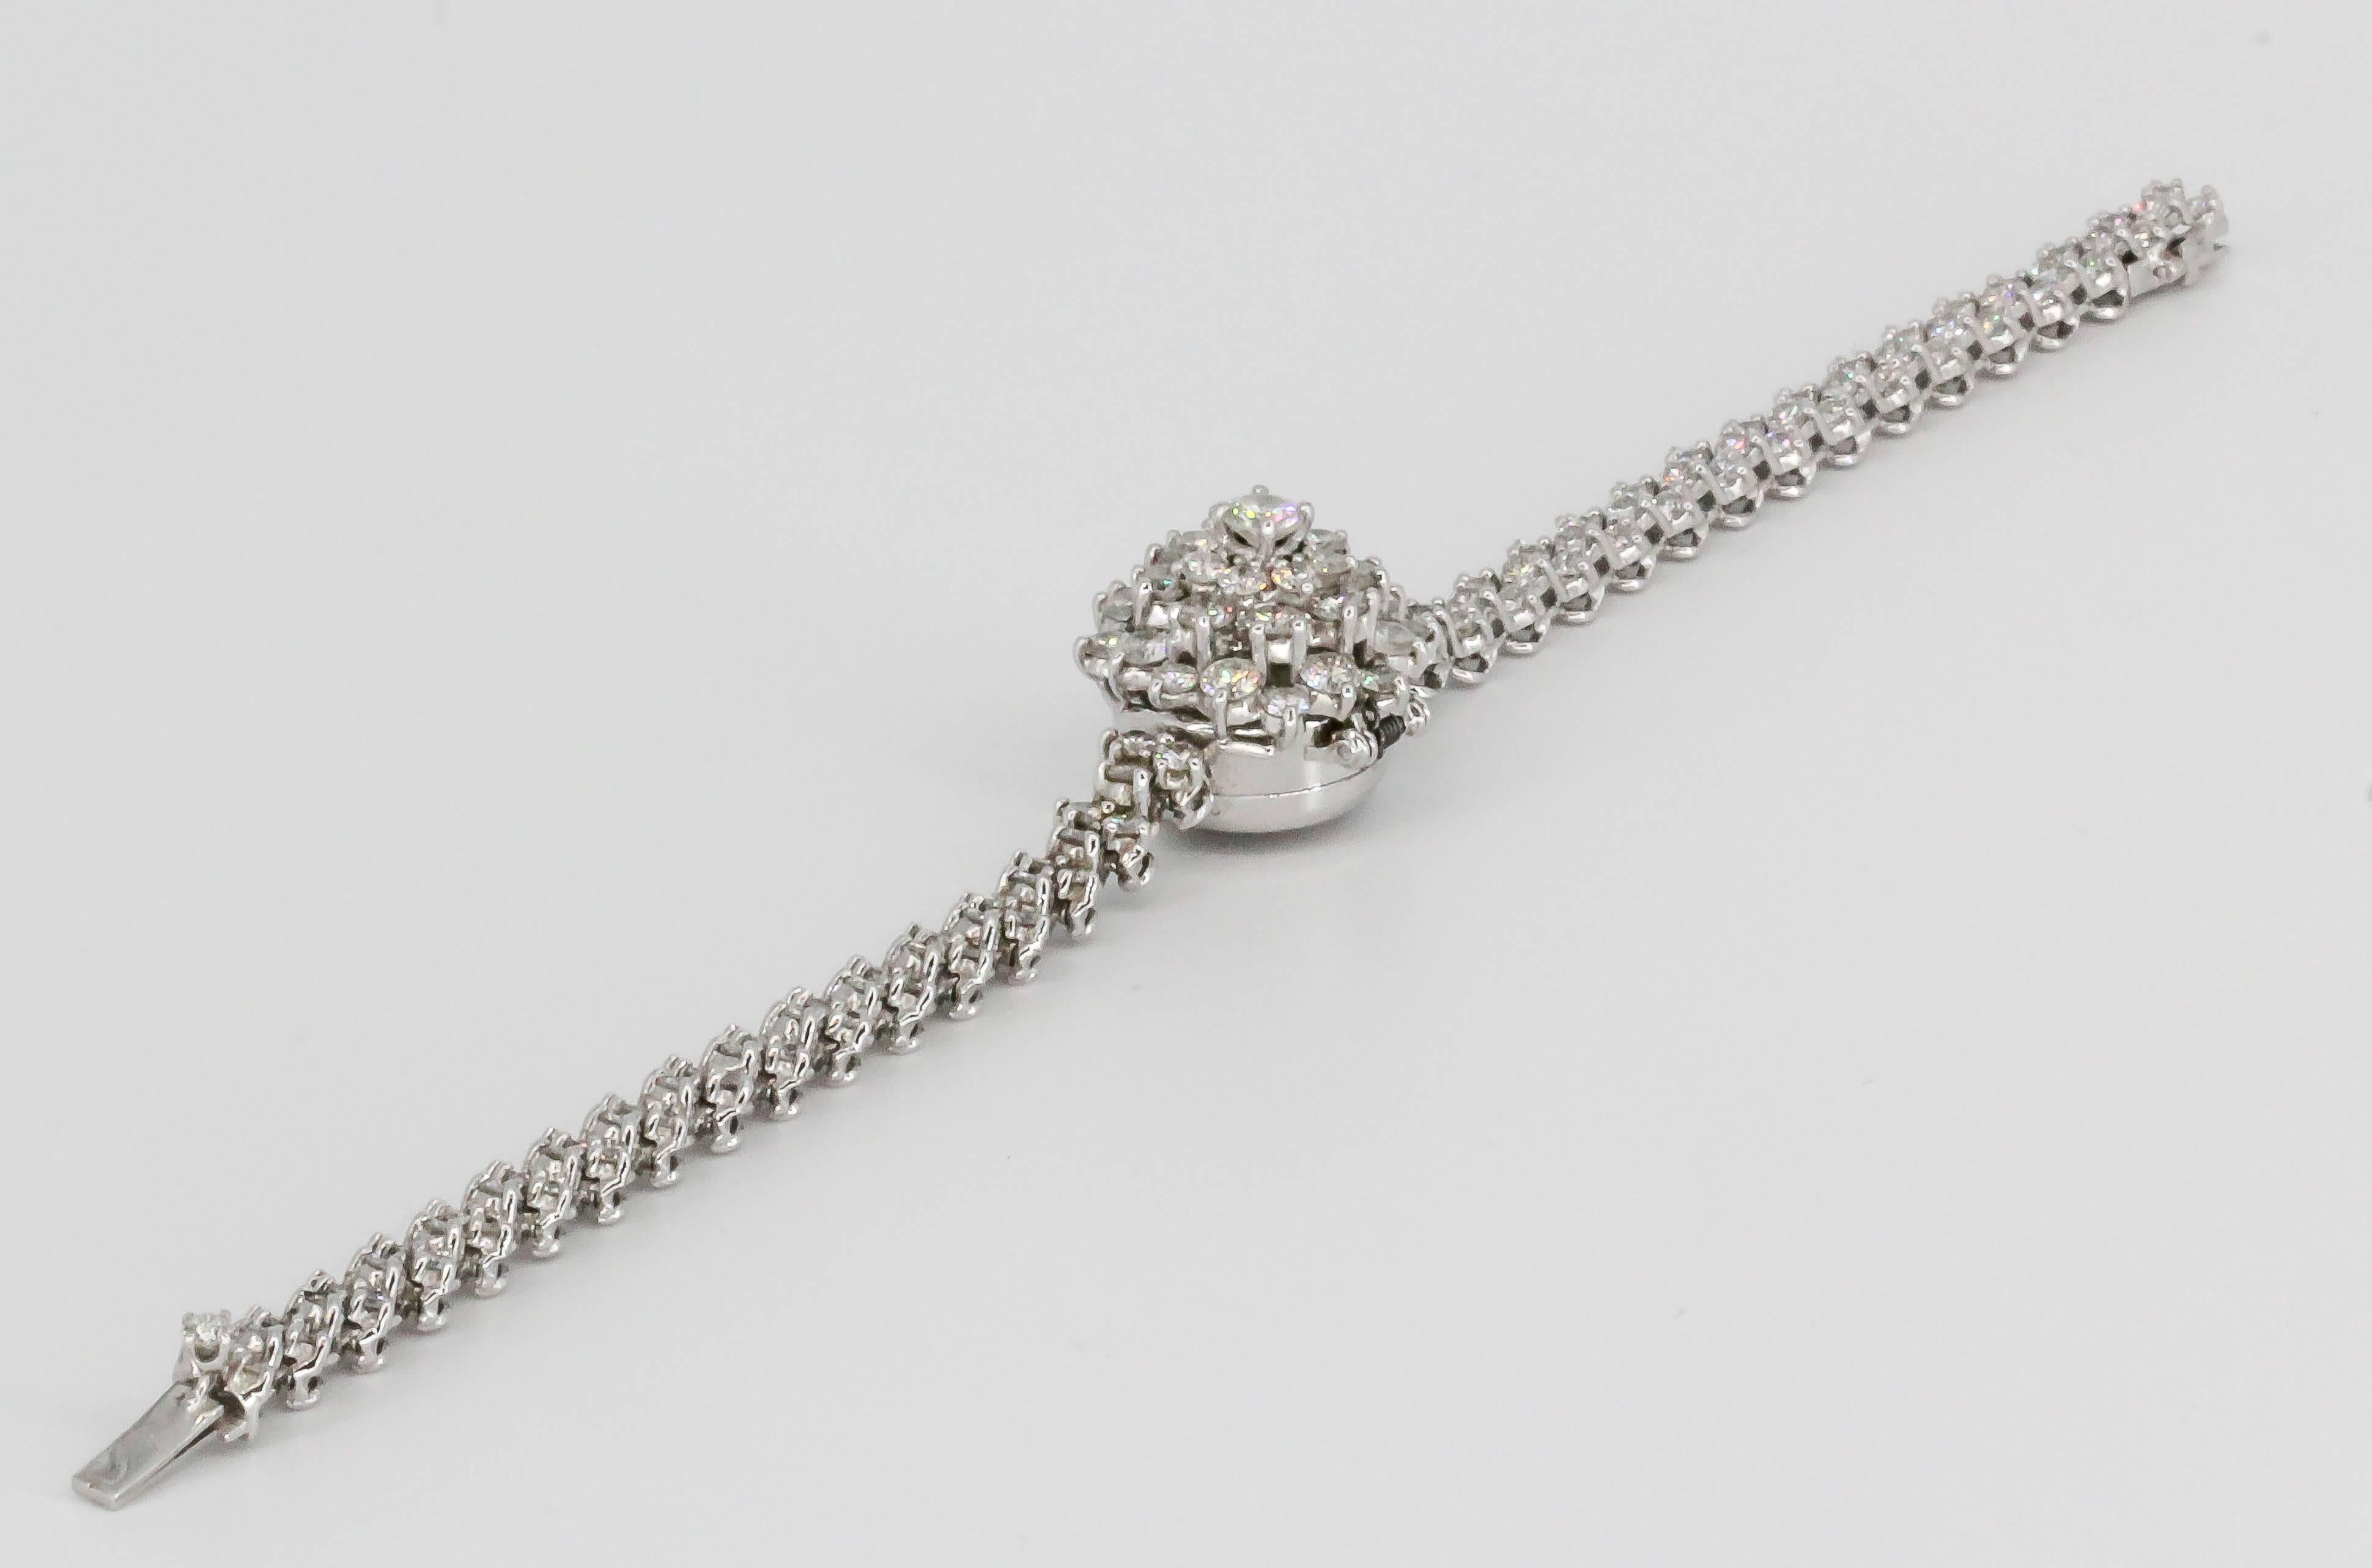 Timeless retro diamond and 18K white gold hidden watch bracelet by Blancpain, circa 1940s. It features high grade round brilliant cut diamonds, approx 4.0-5.0cts total weight. The hidden watch has a backwind mechanism and is signed Blancpain on